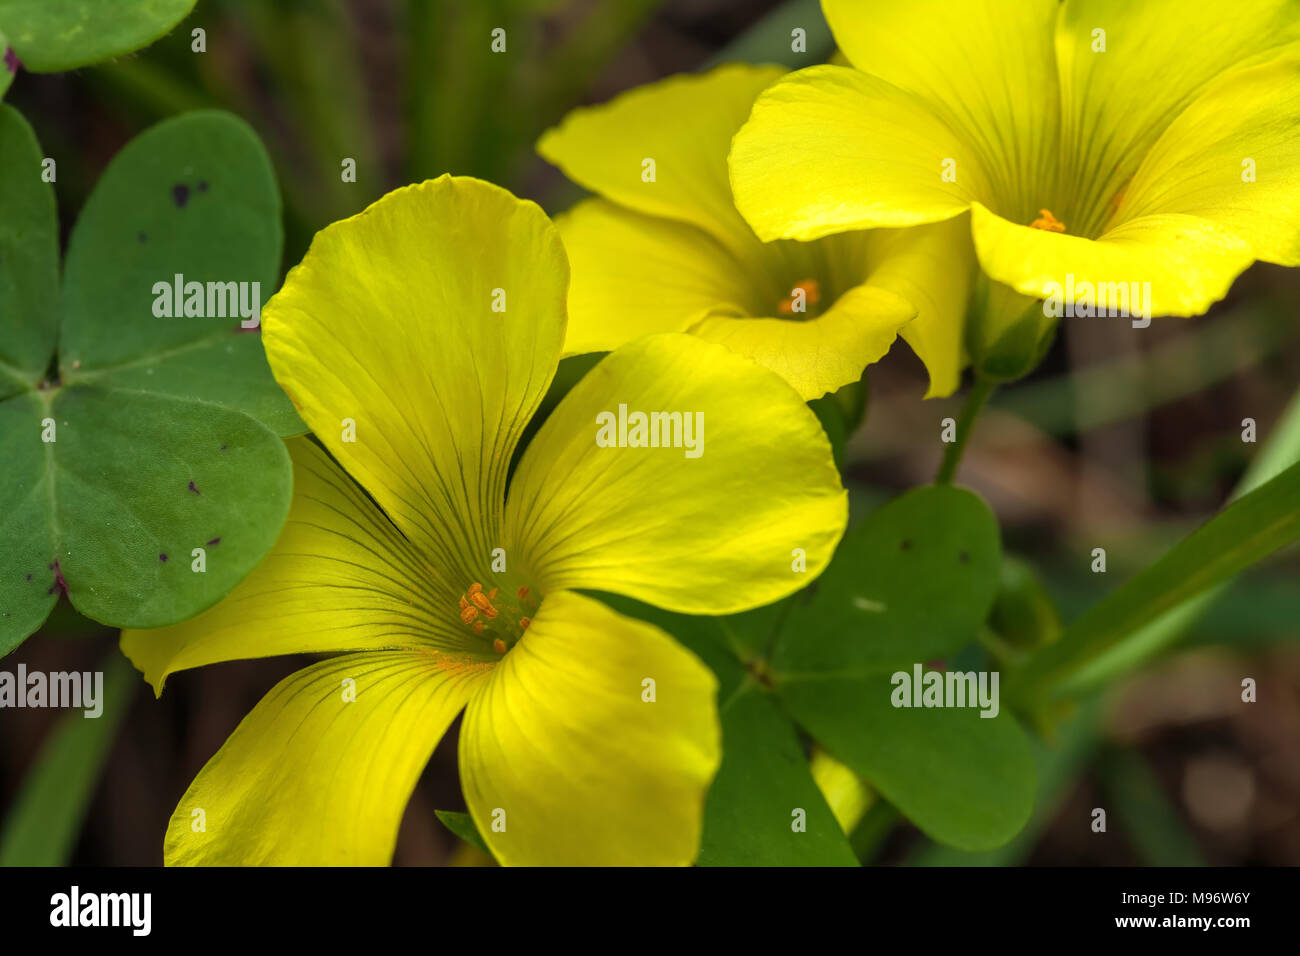 Bermuda buttercup flowers (Oxalis pes-caprae) bloom in early spring in Point Lobos Natural State Reserve, Carmel, California, United States. Stock Photo